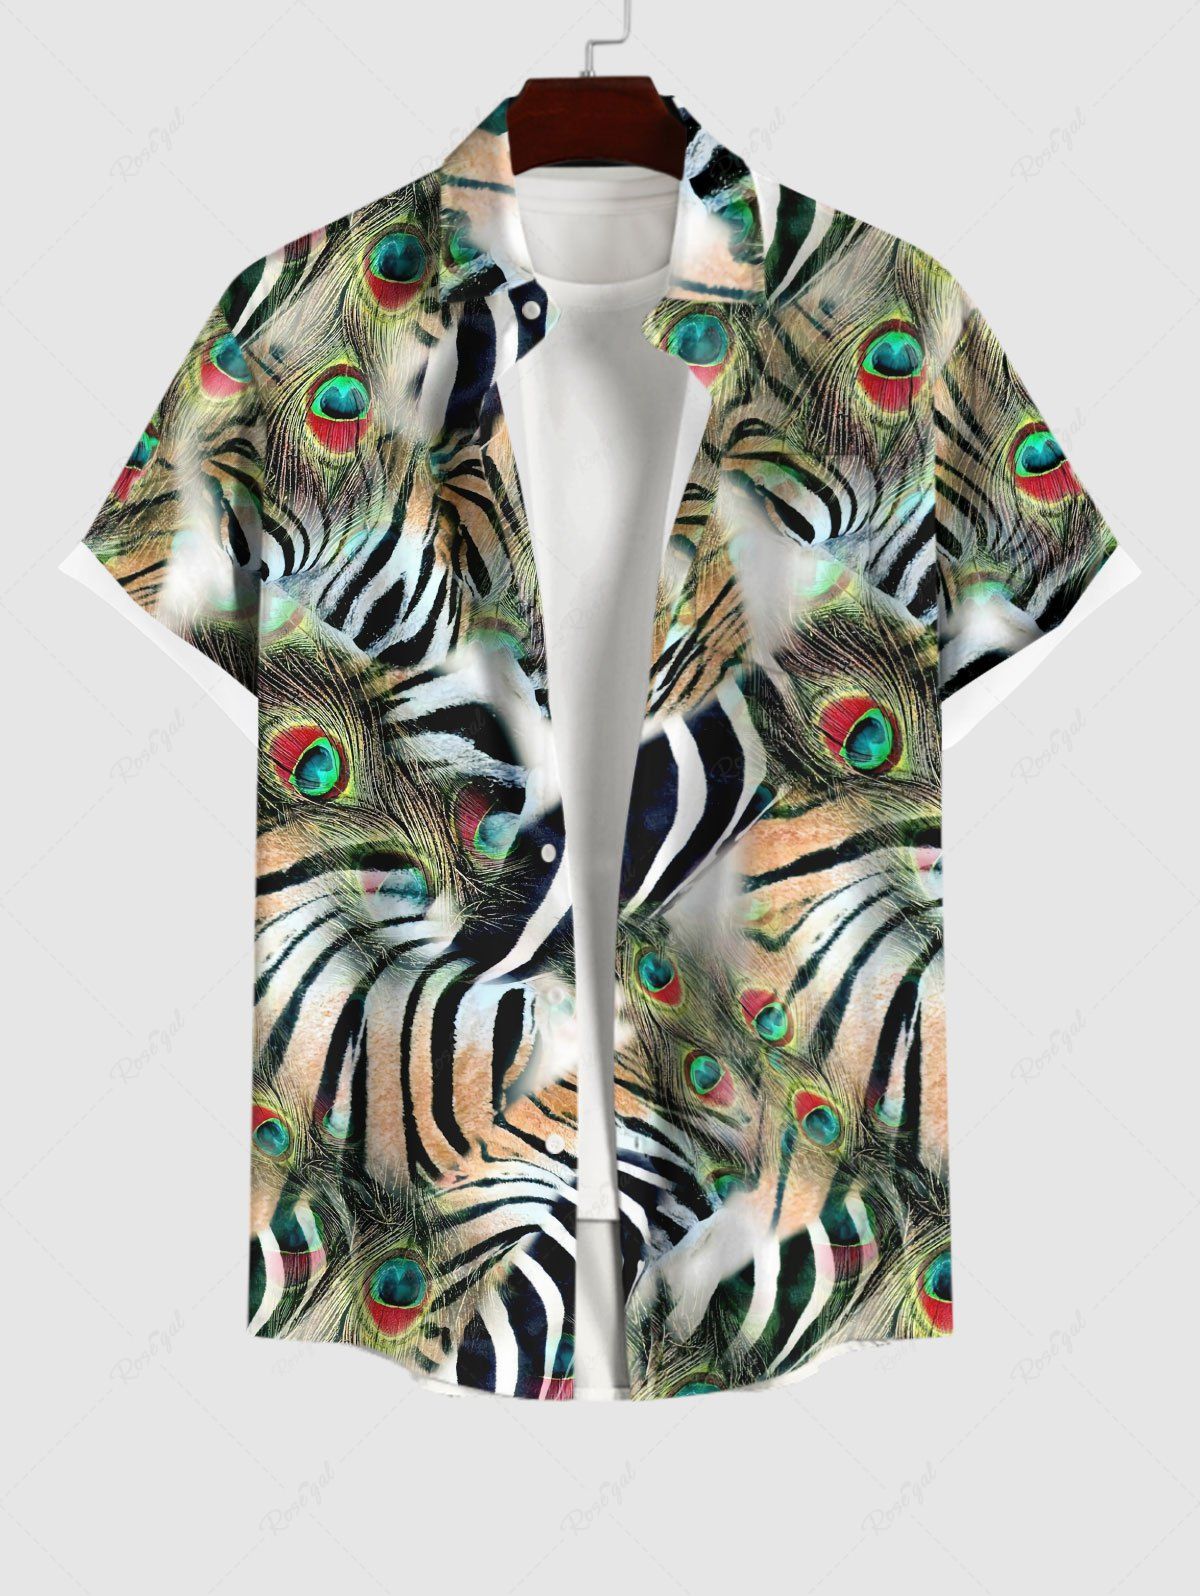 Buy Hawaii Plus Size Turn-down Collar Peacock Feather Tiger Zebra Striped Print Button Pocket Shirt For Men  